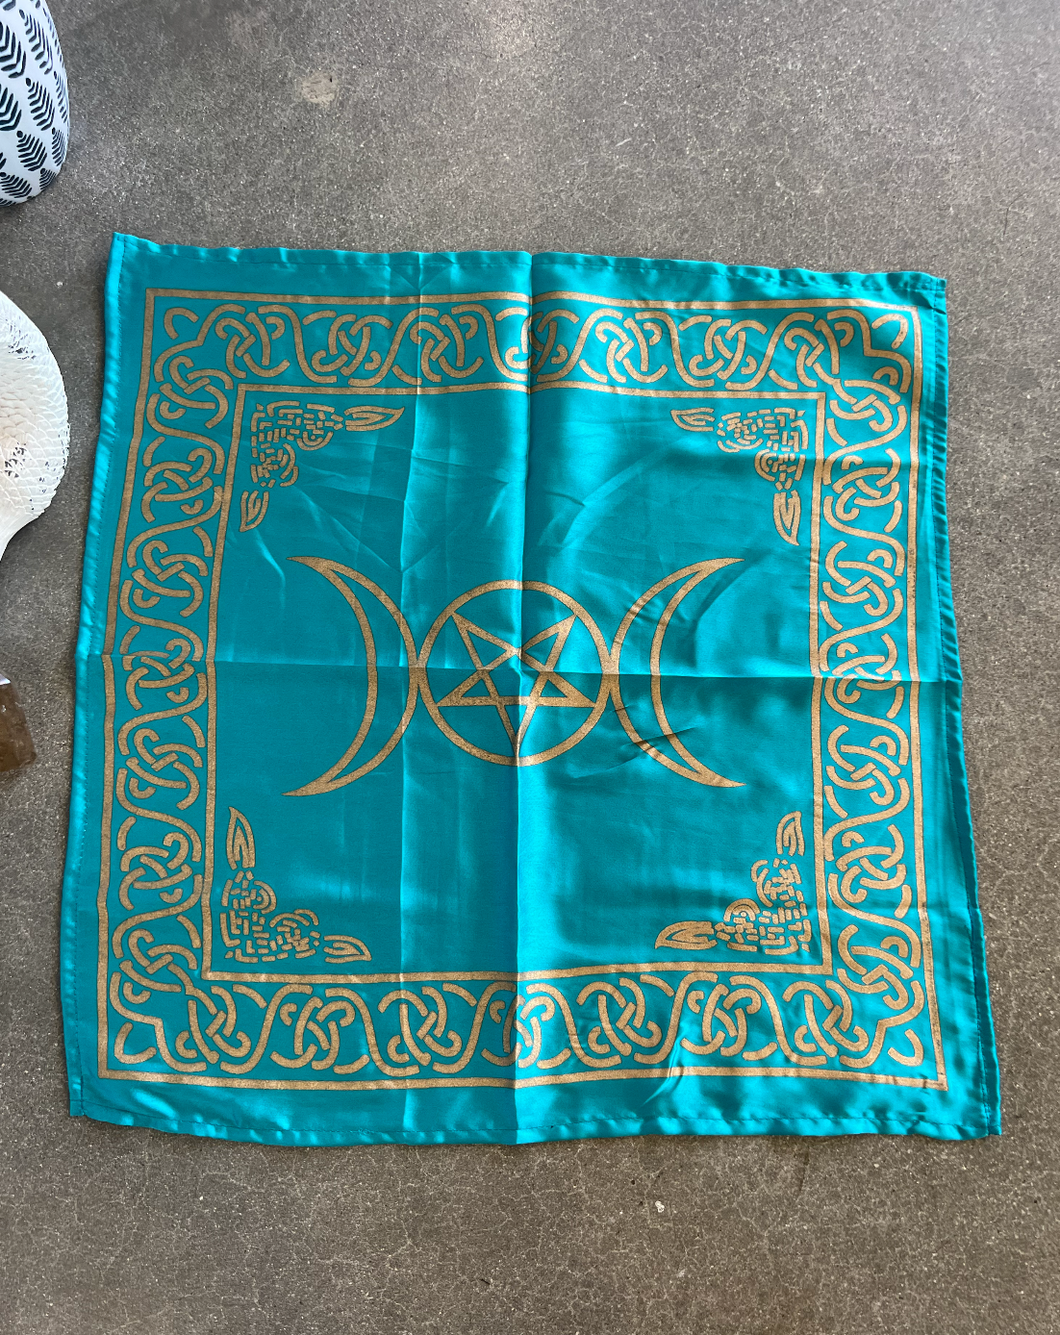 Triple Moon Pentacle Turquoise and Gold Altar Cloth